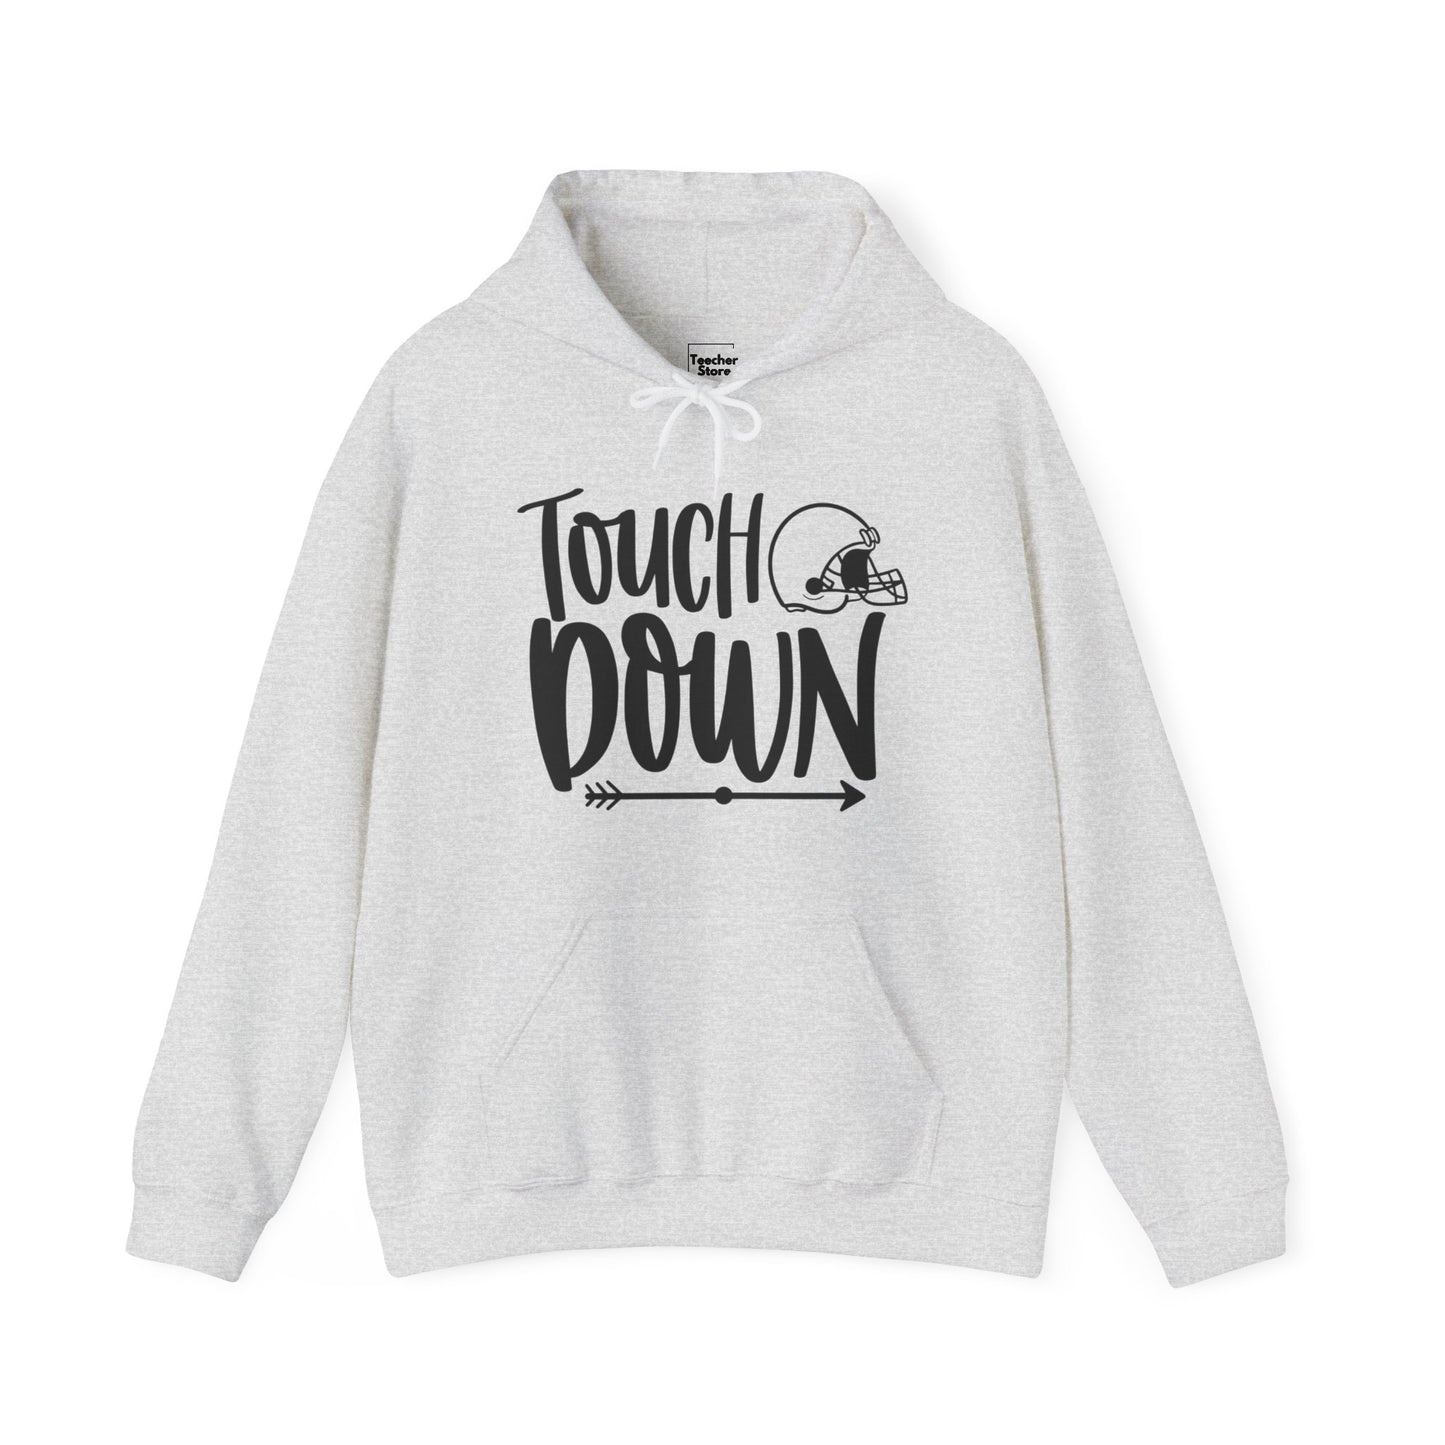 Touch Down Hooded Sweatshirt